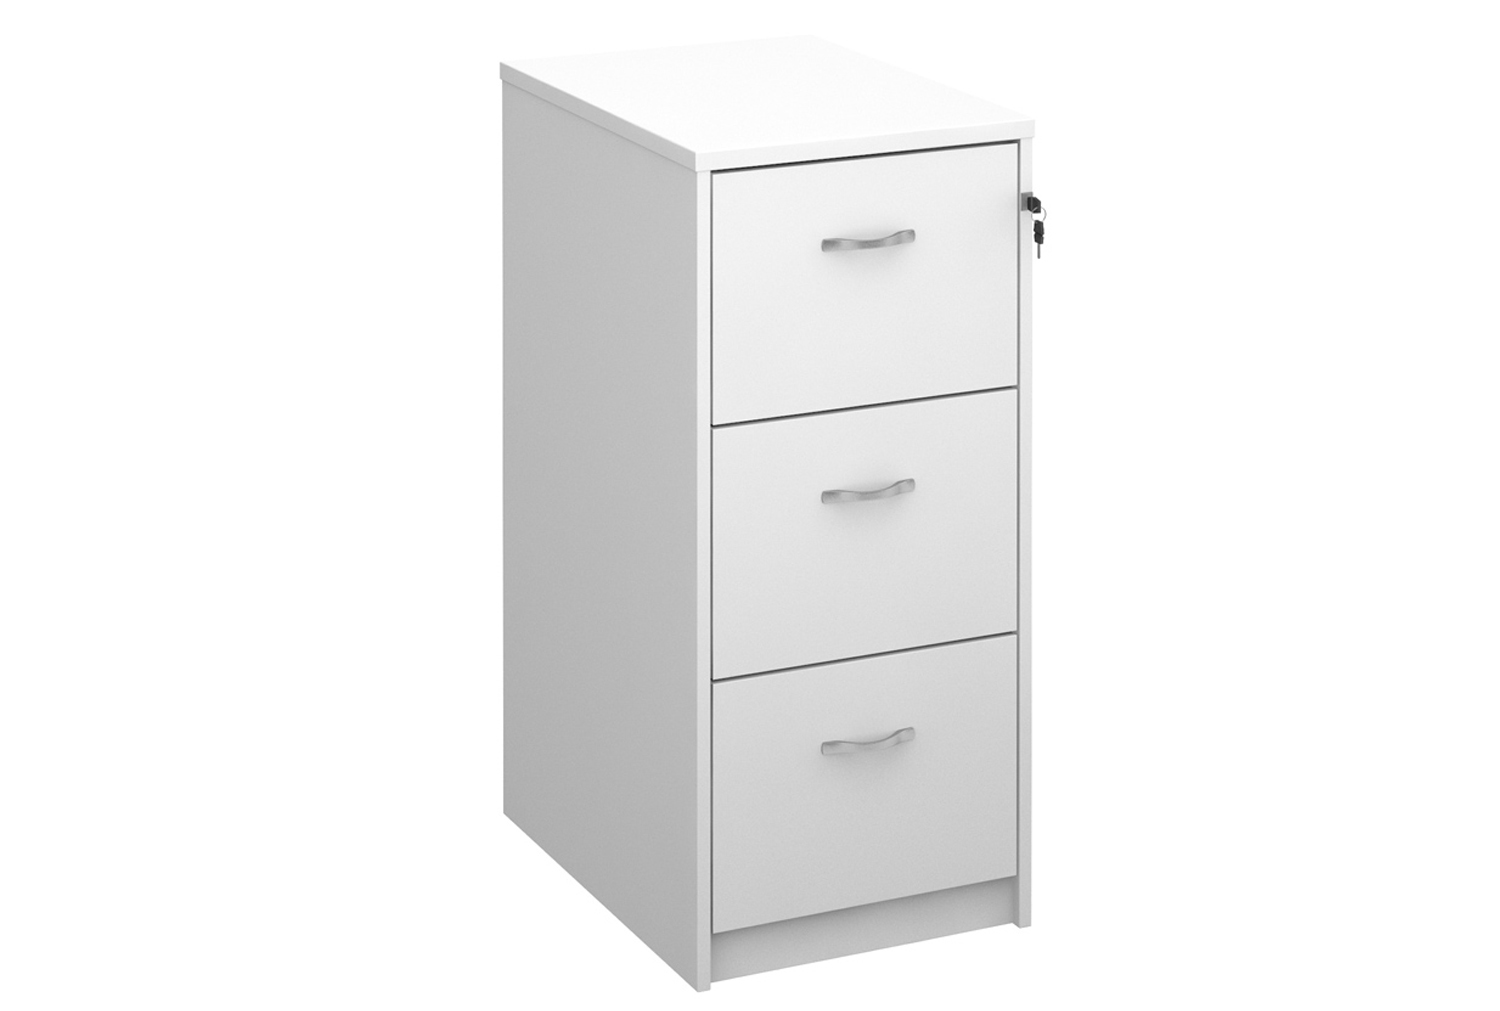 Tully Filing Cabinets, 3 Drawer - 48wx66dx105h (cm), White, Fully Installed